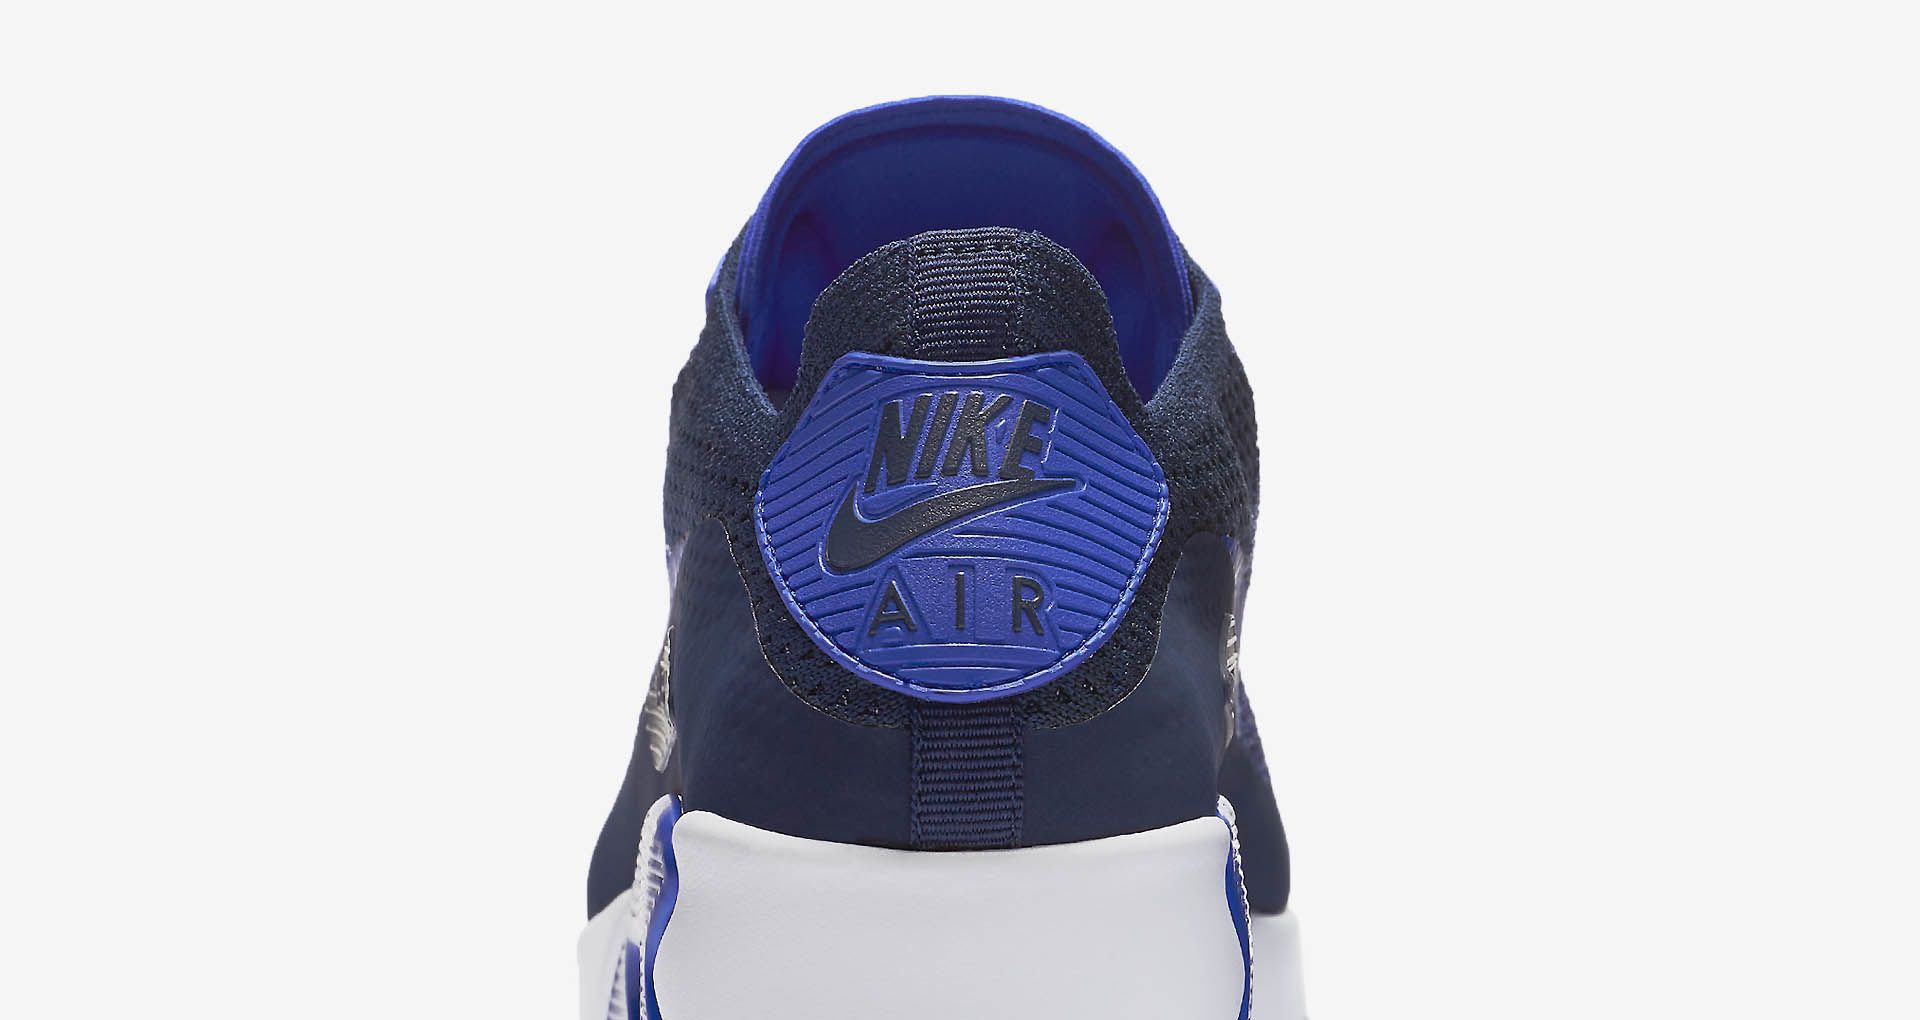 Nike Air Max 90 Ultra 2.0 Flyknit 'College Navy'. Nike SNKRS